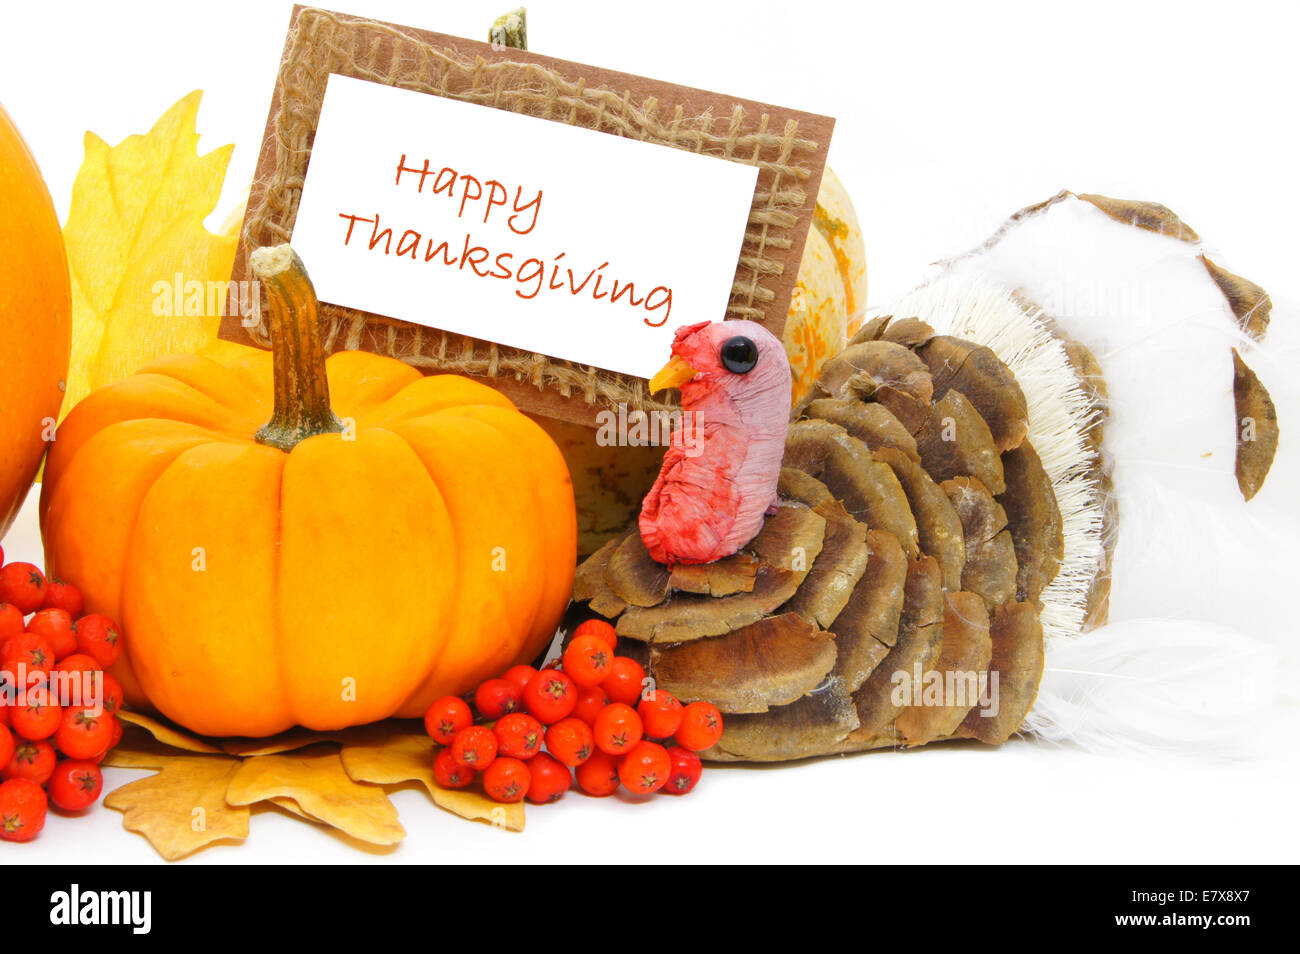 Happy Thanksgiving card with pumpkin and turkey decor over white Stock Photo